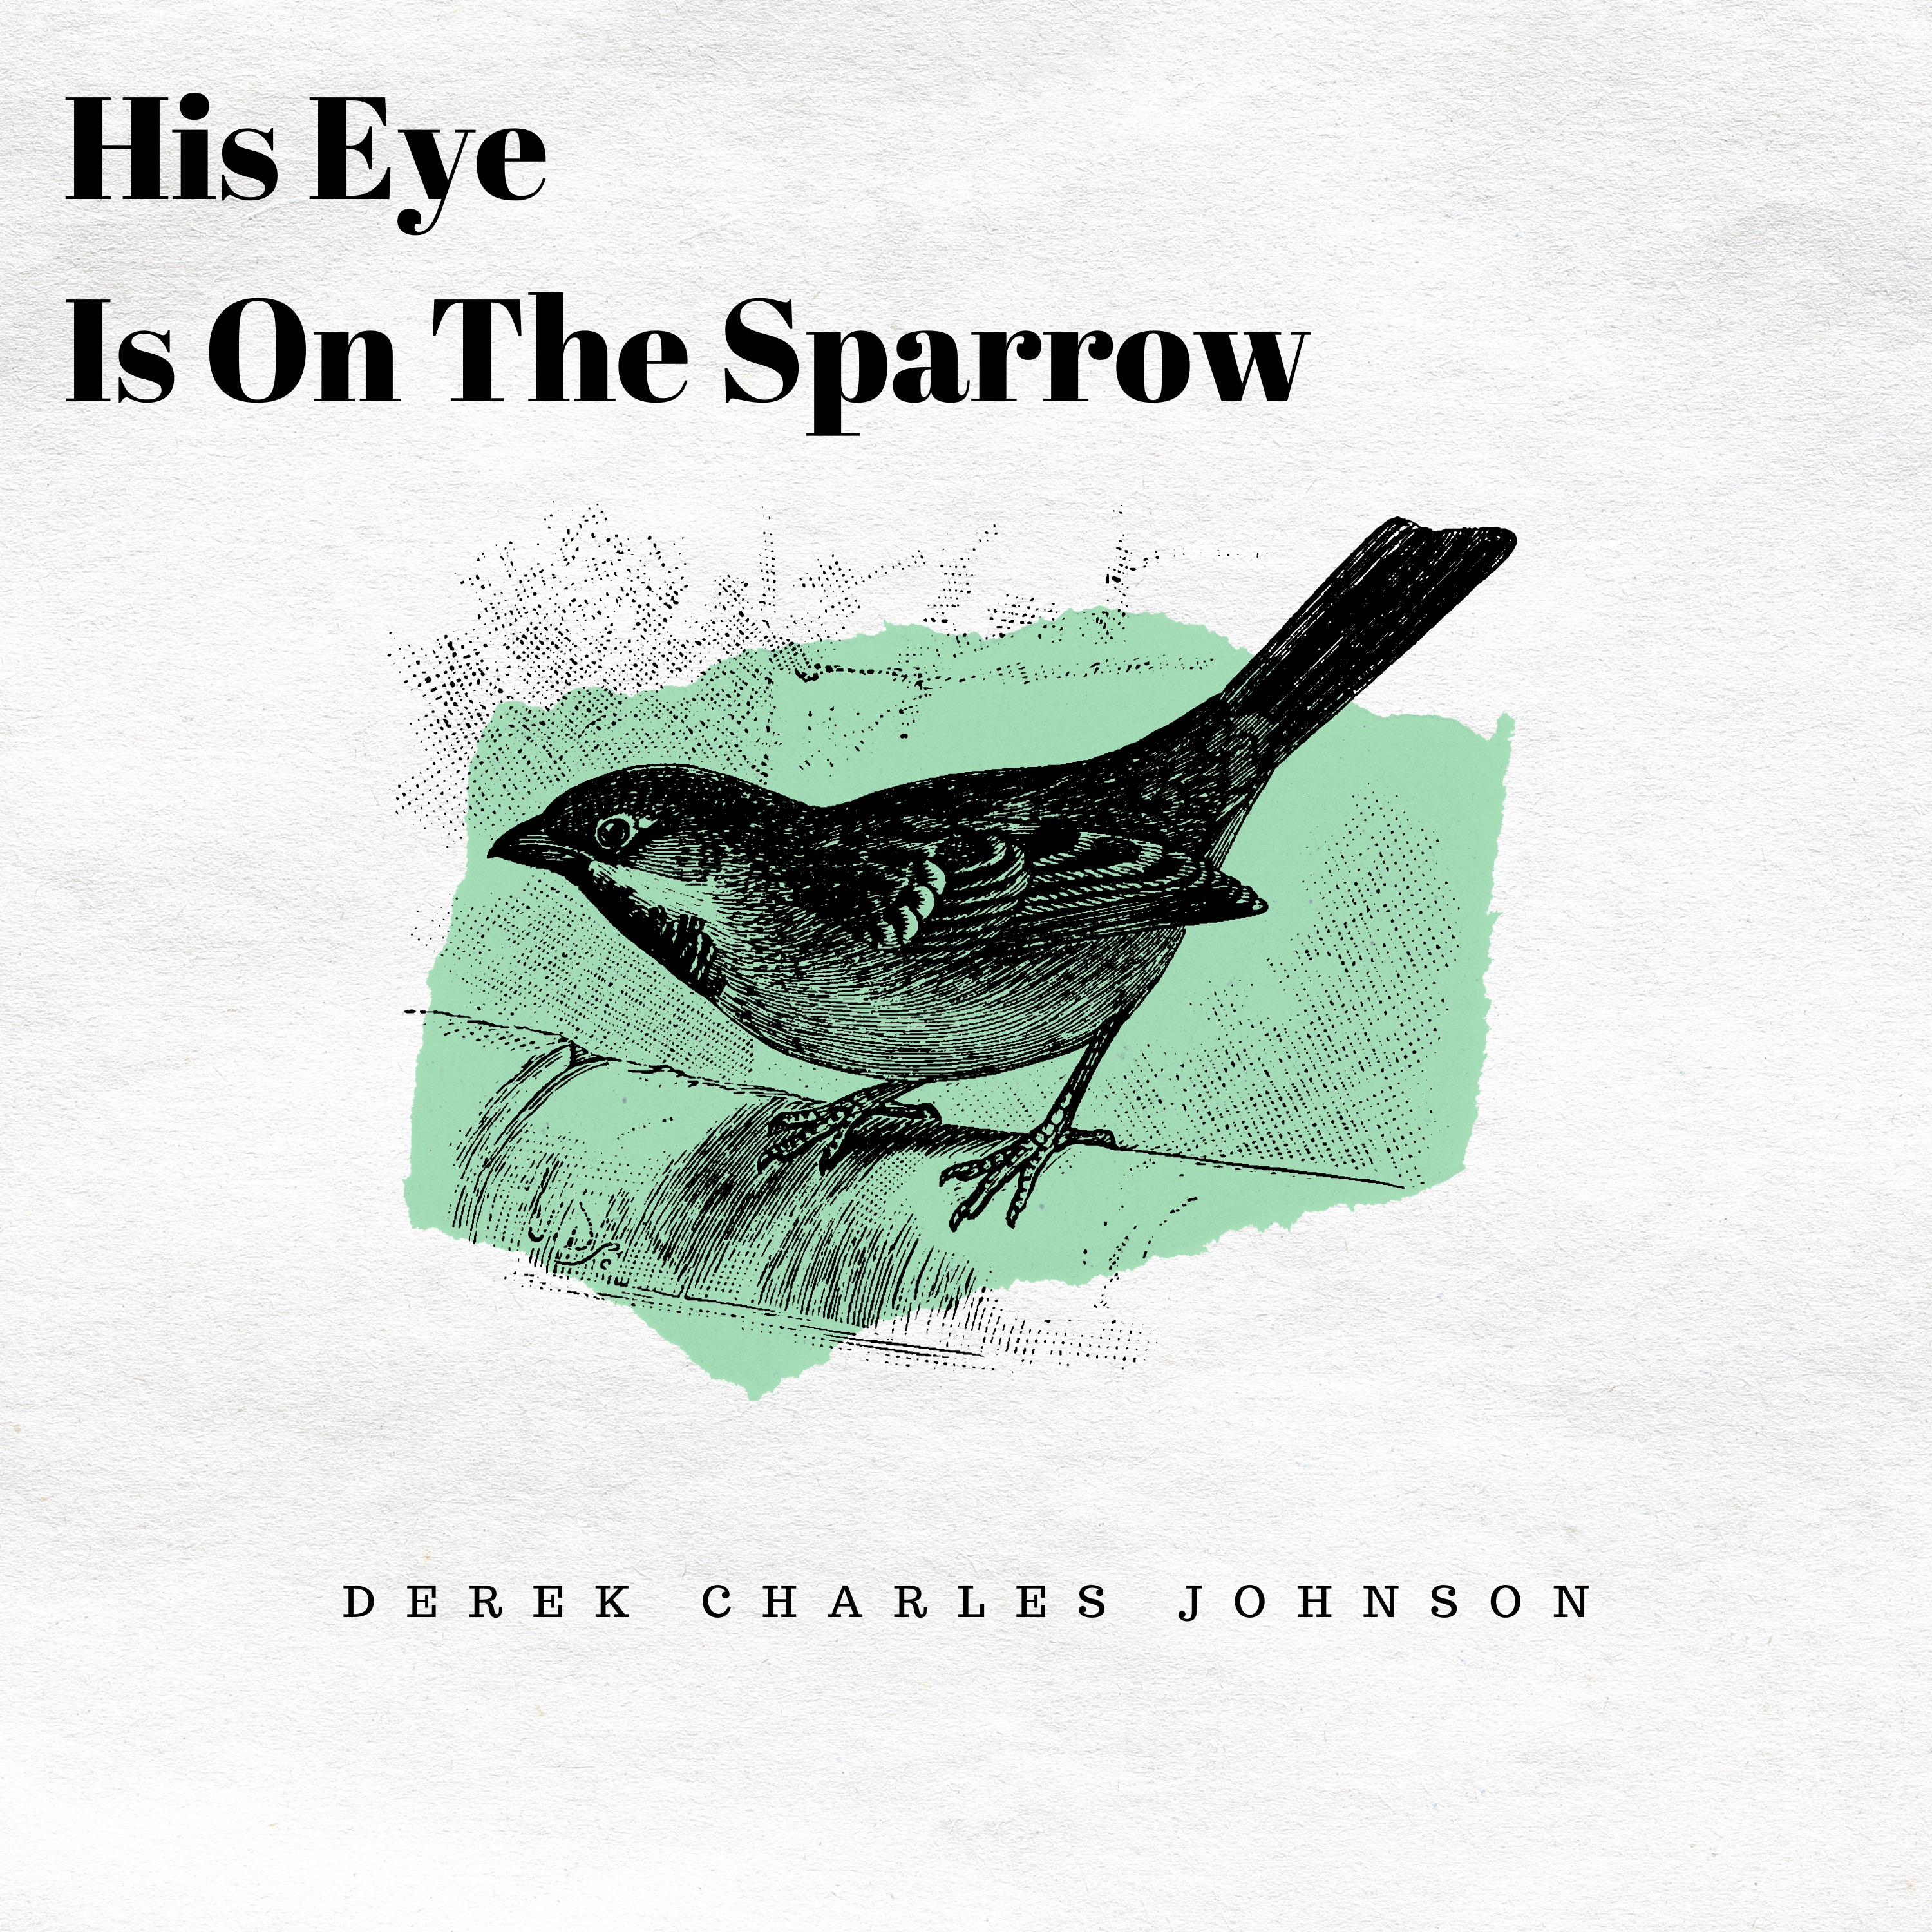 His Eye Is on the Sparrow - Wikipedia